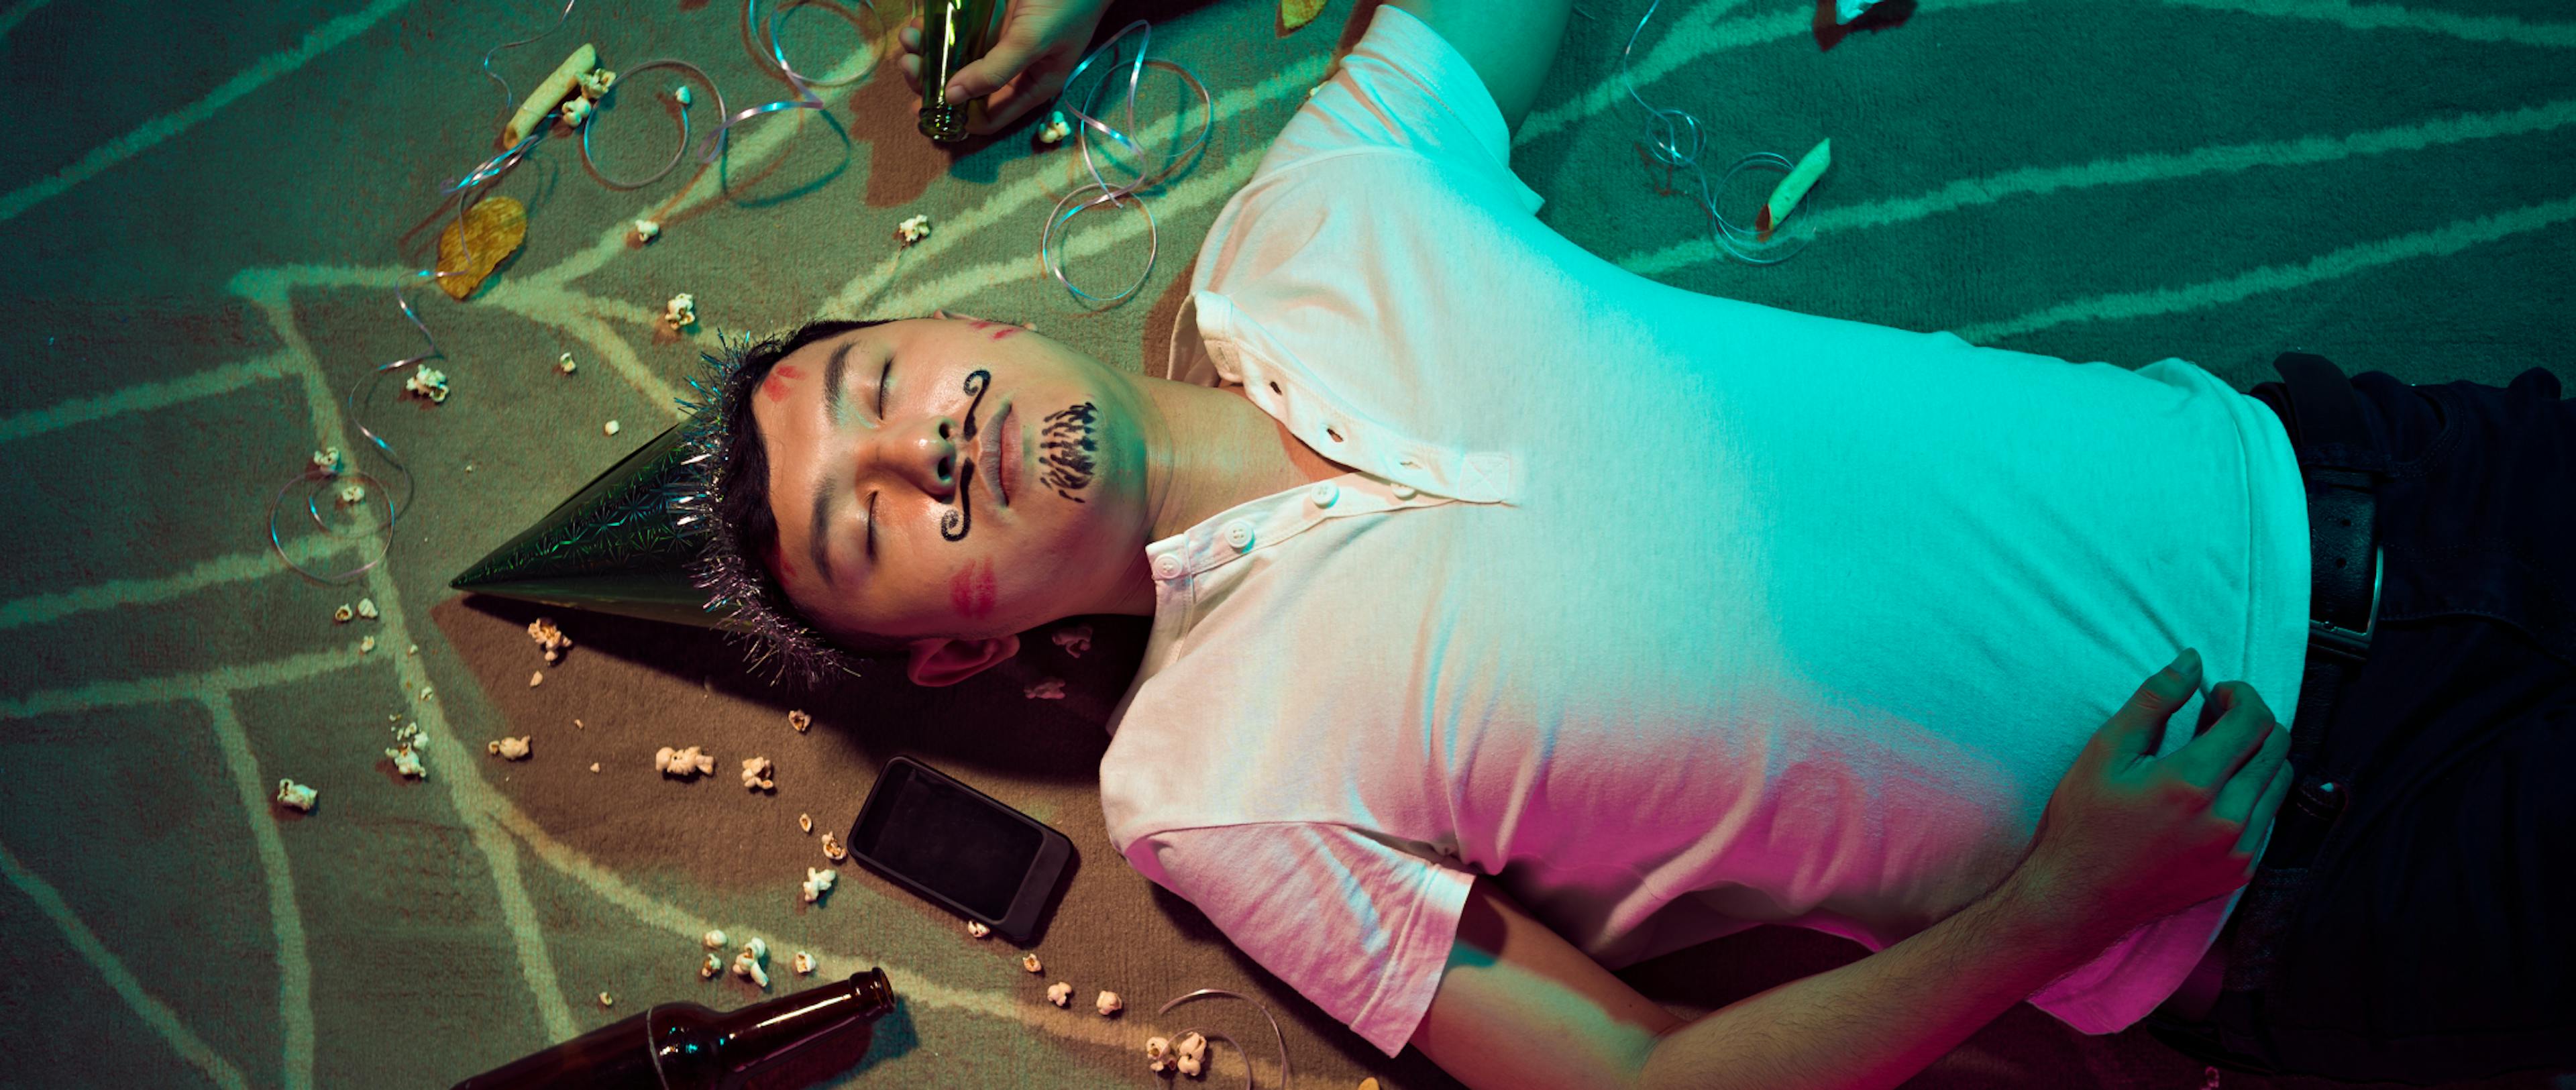 A drunk man lying on the ground after a party with bottles lying around.